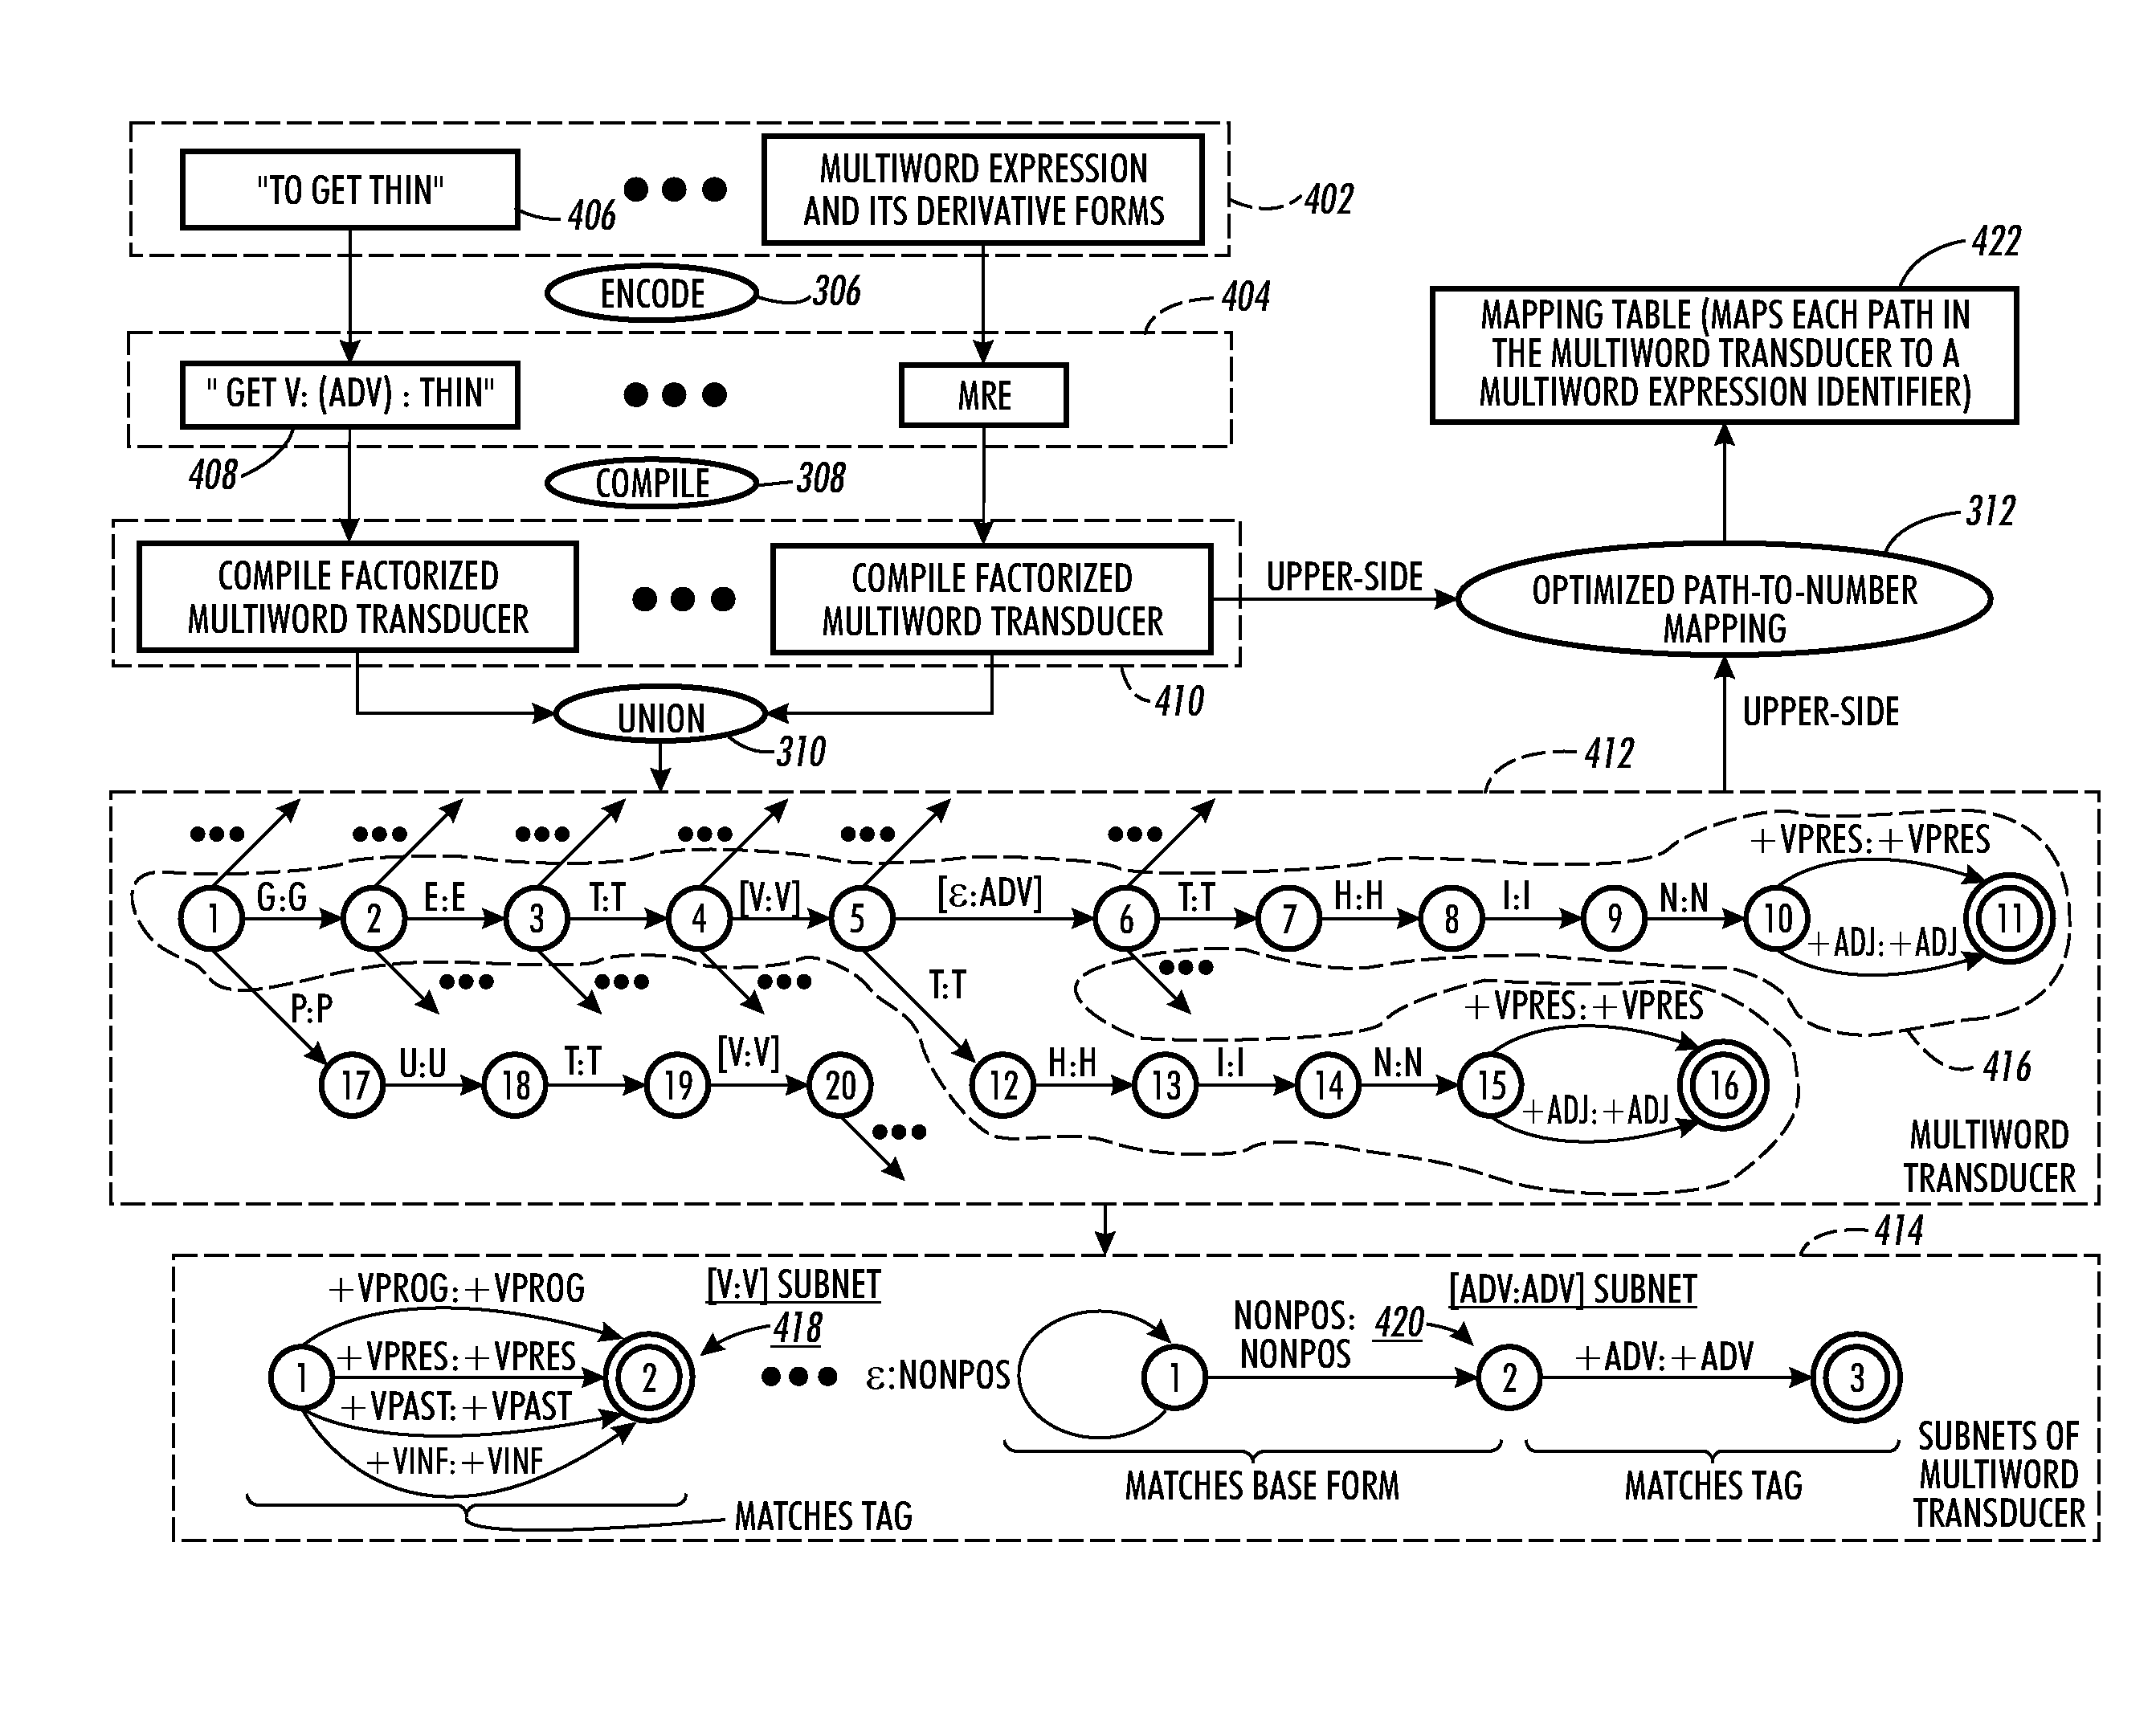 Method and apparatus for mapping multiword expressions to identifiers using finite-state networks